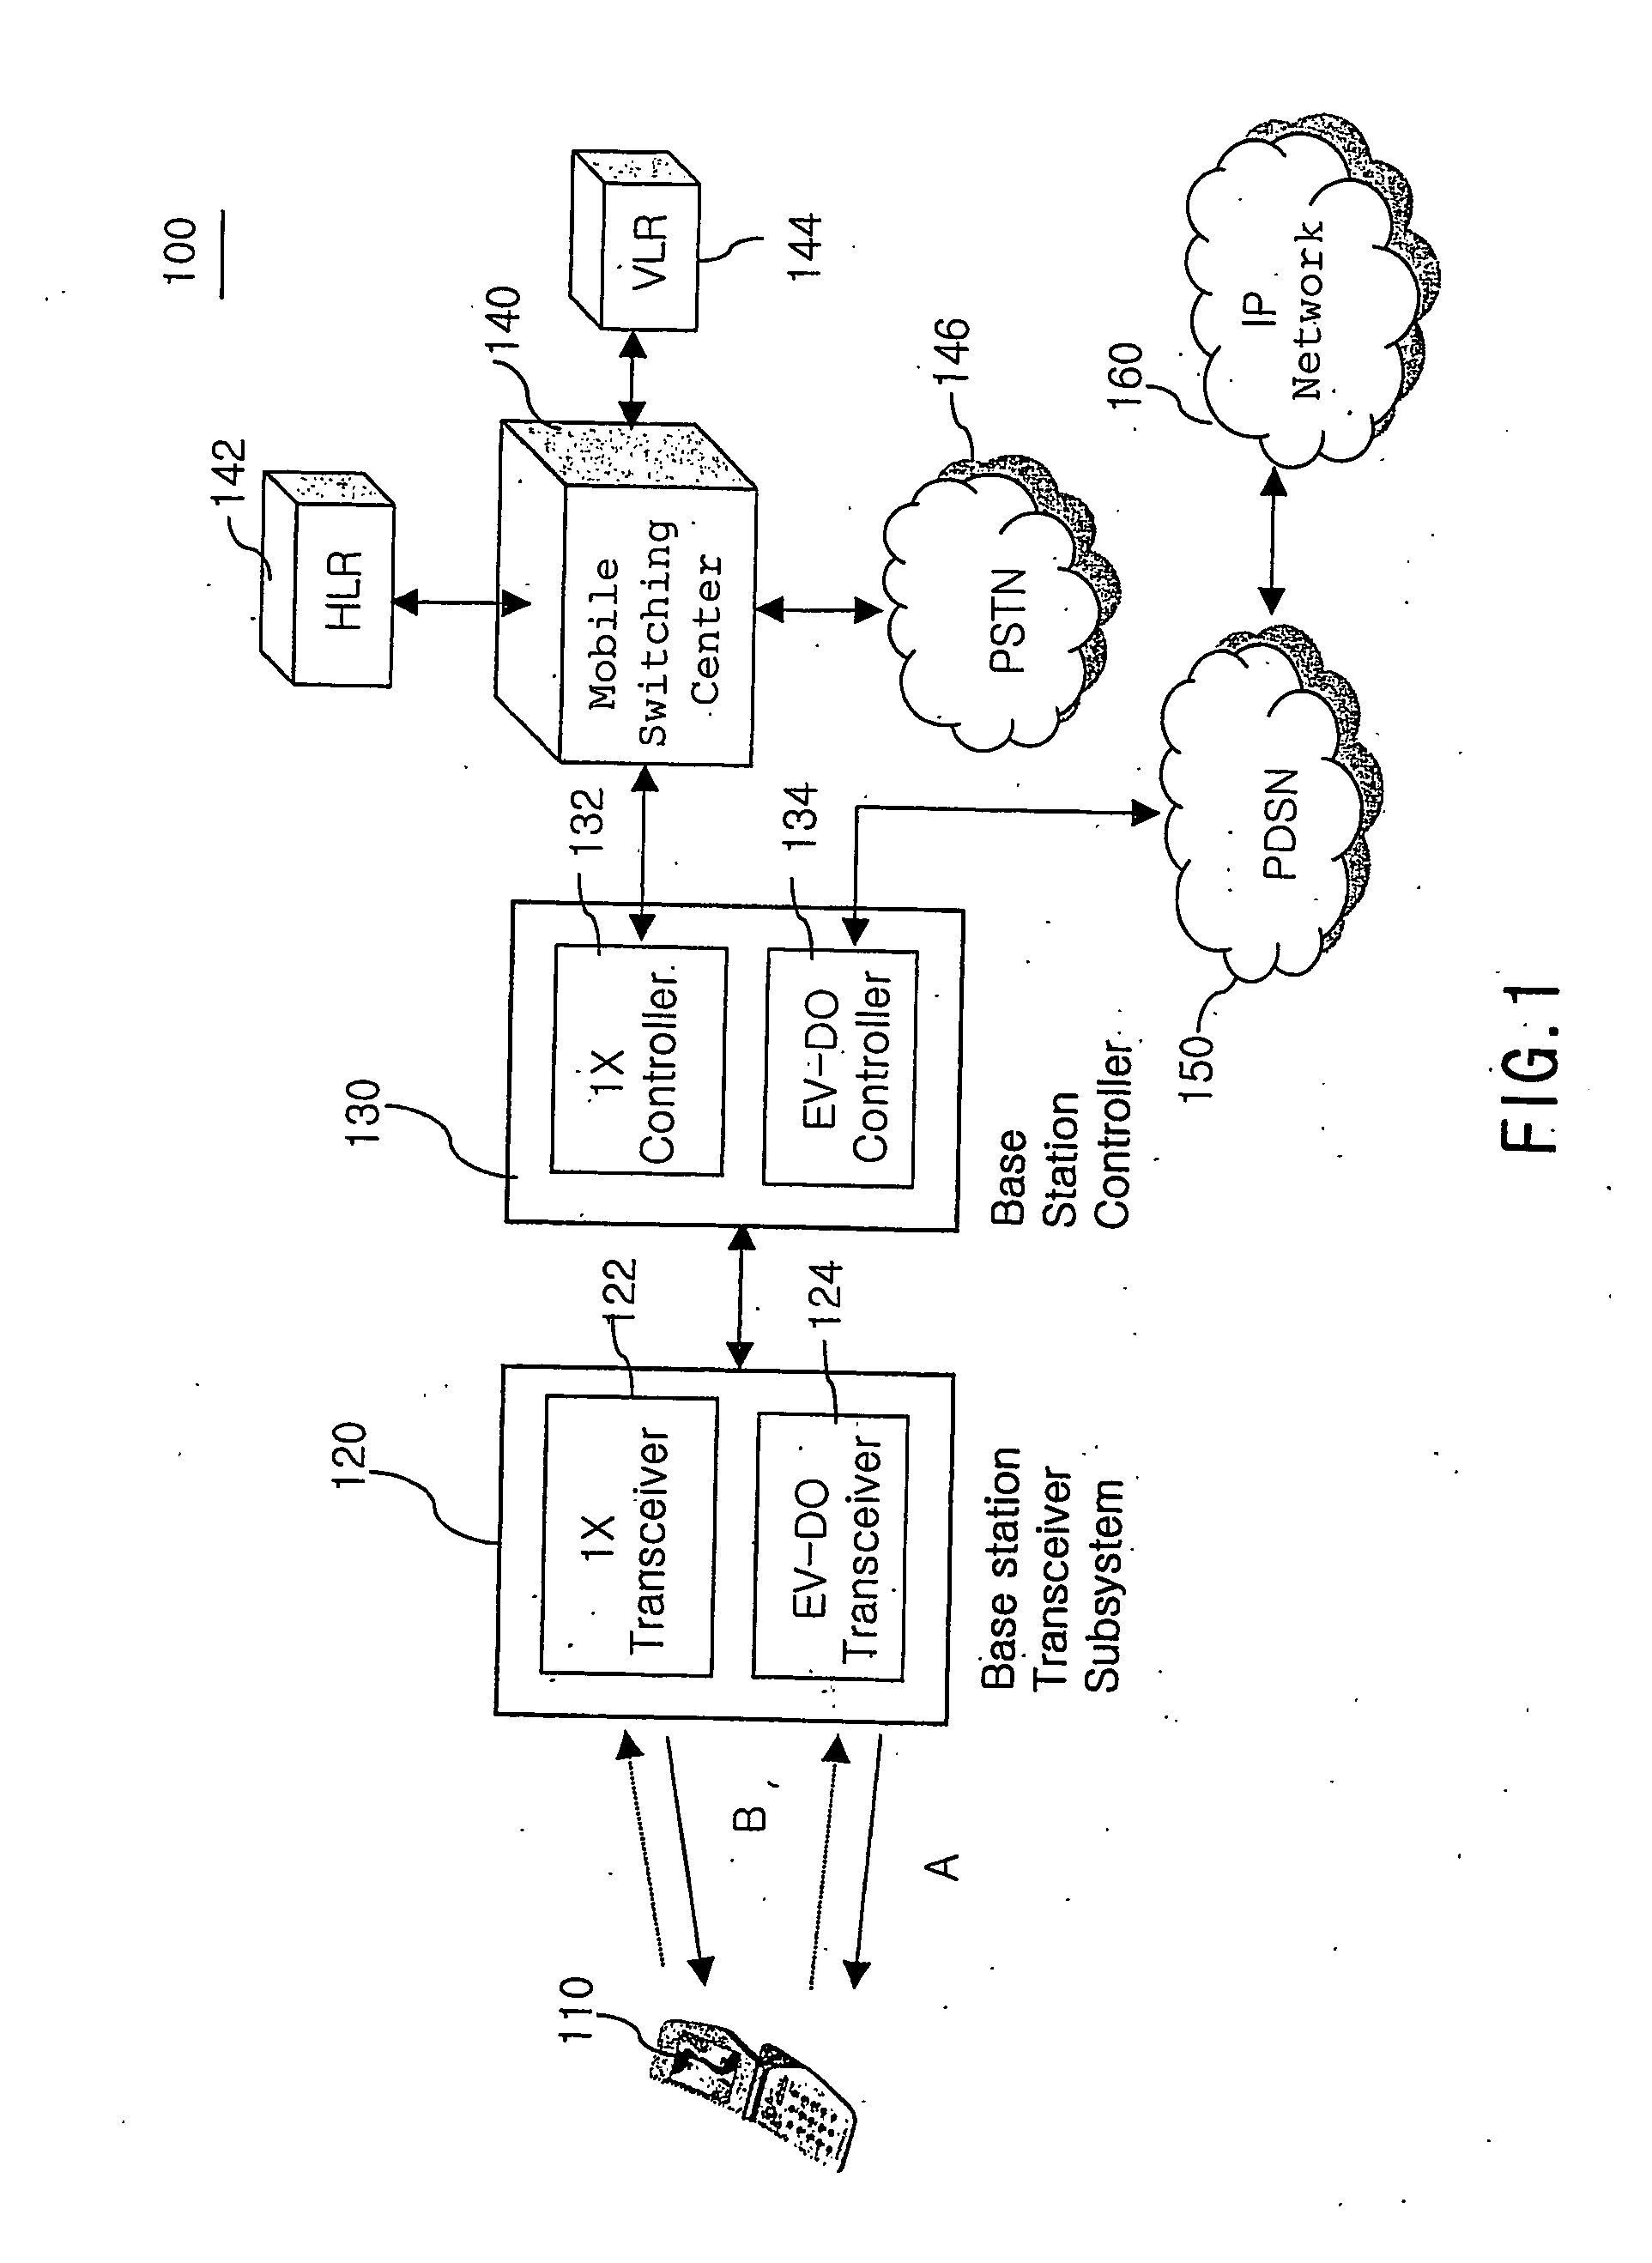 Method and system for recovering from hand-off fail for use in cdma 2000 1xev-do system